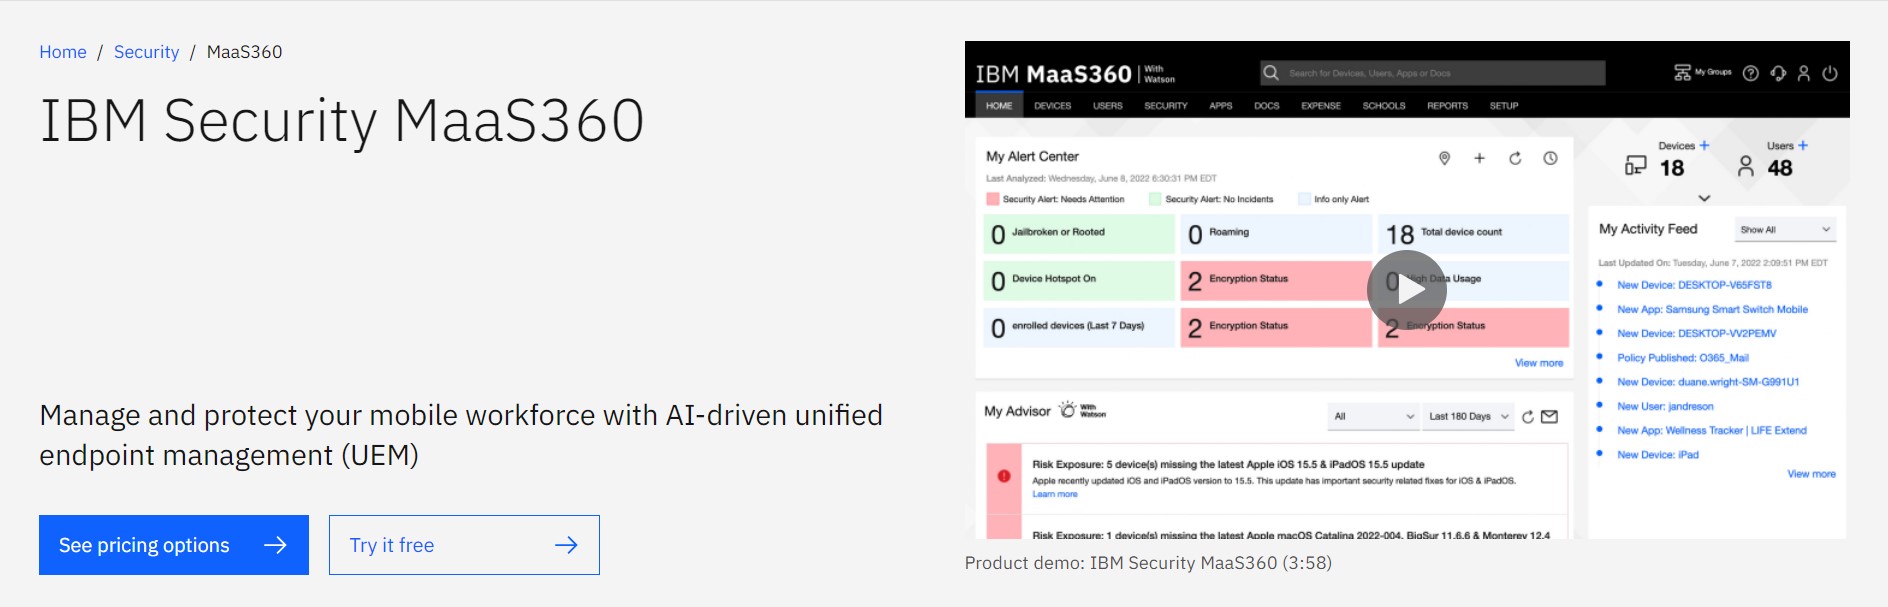 A webpage for IBM Security MaaS360, displaying a dashboard for managing and protecting mobile workforces with AI-driven unified endpoint management (UEM). The page includes options to "See pricing options" and "Try it free." The dashboard shows an alert center, device and user statistics, and an activity feed. 